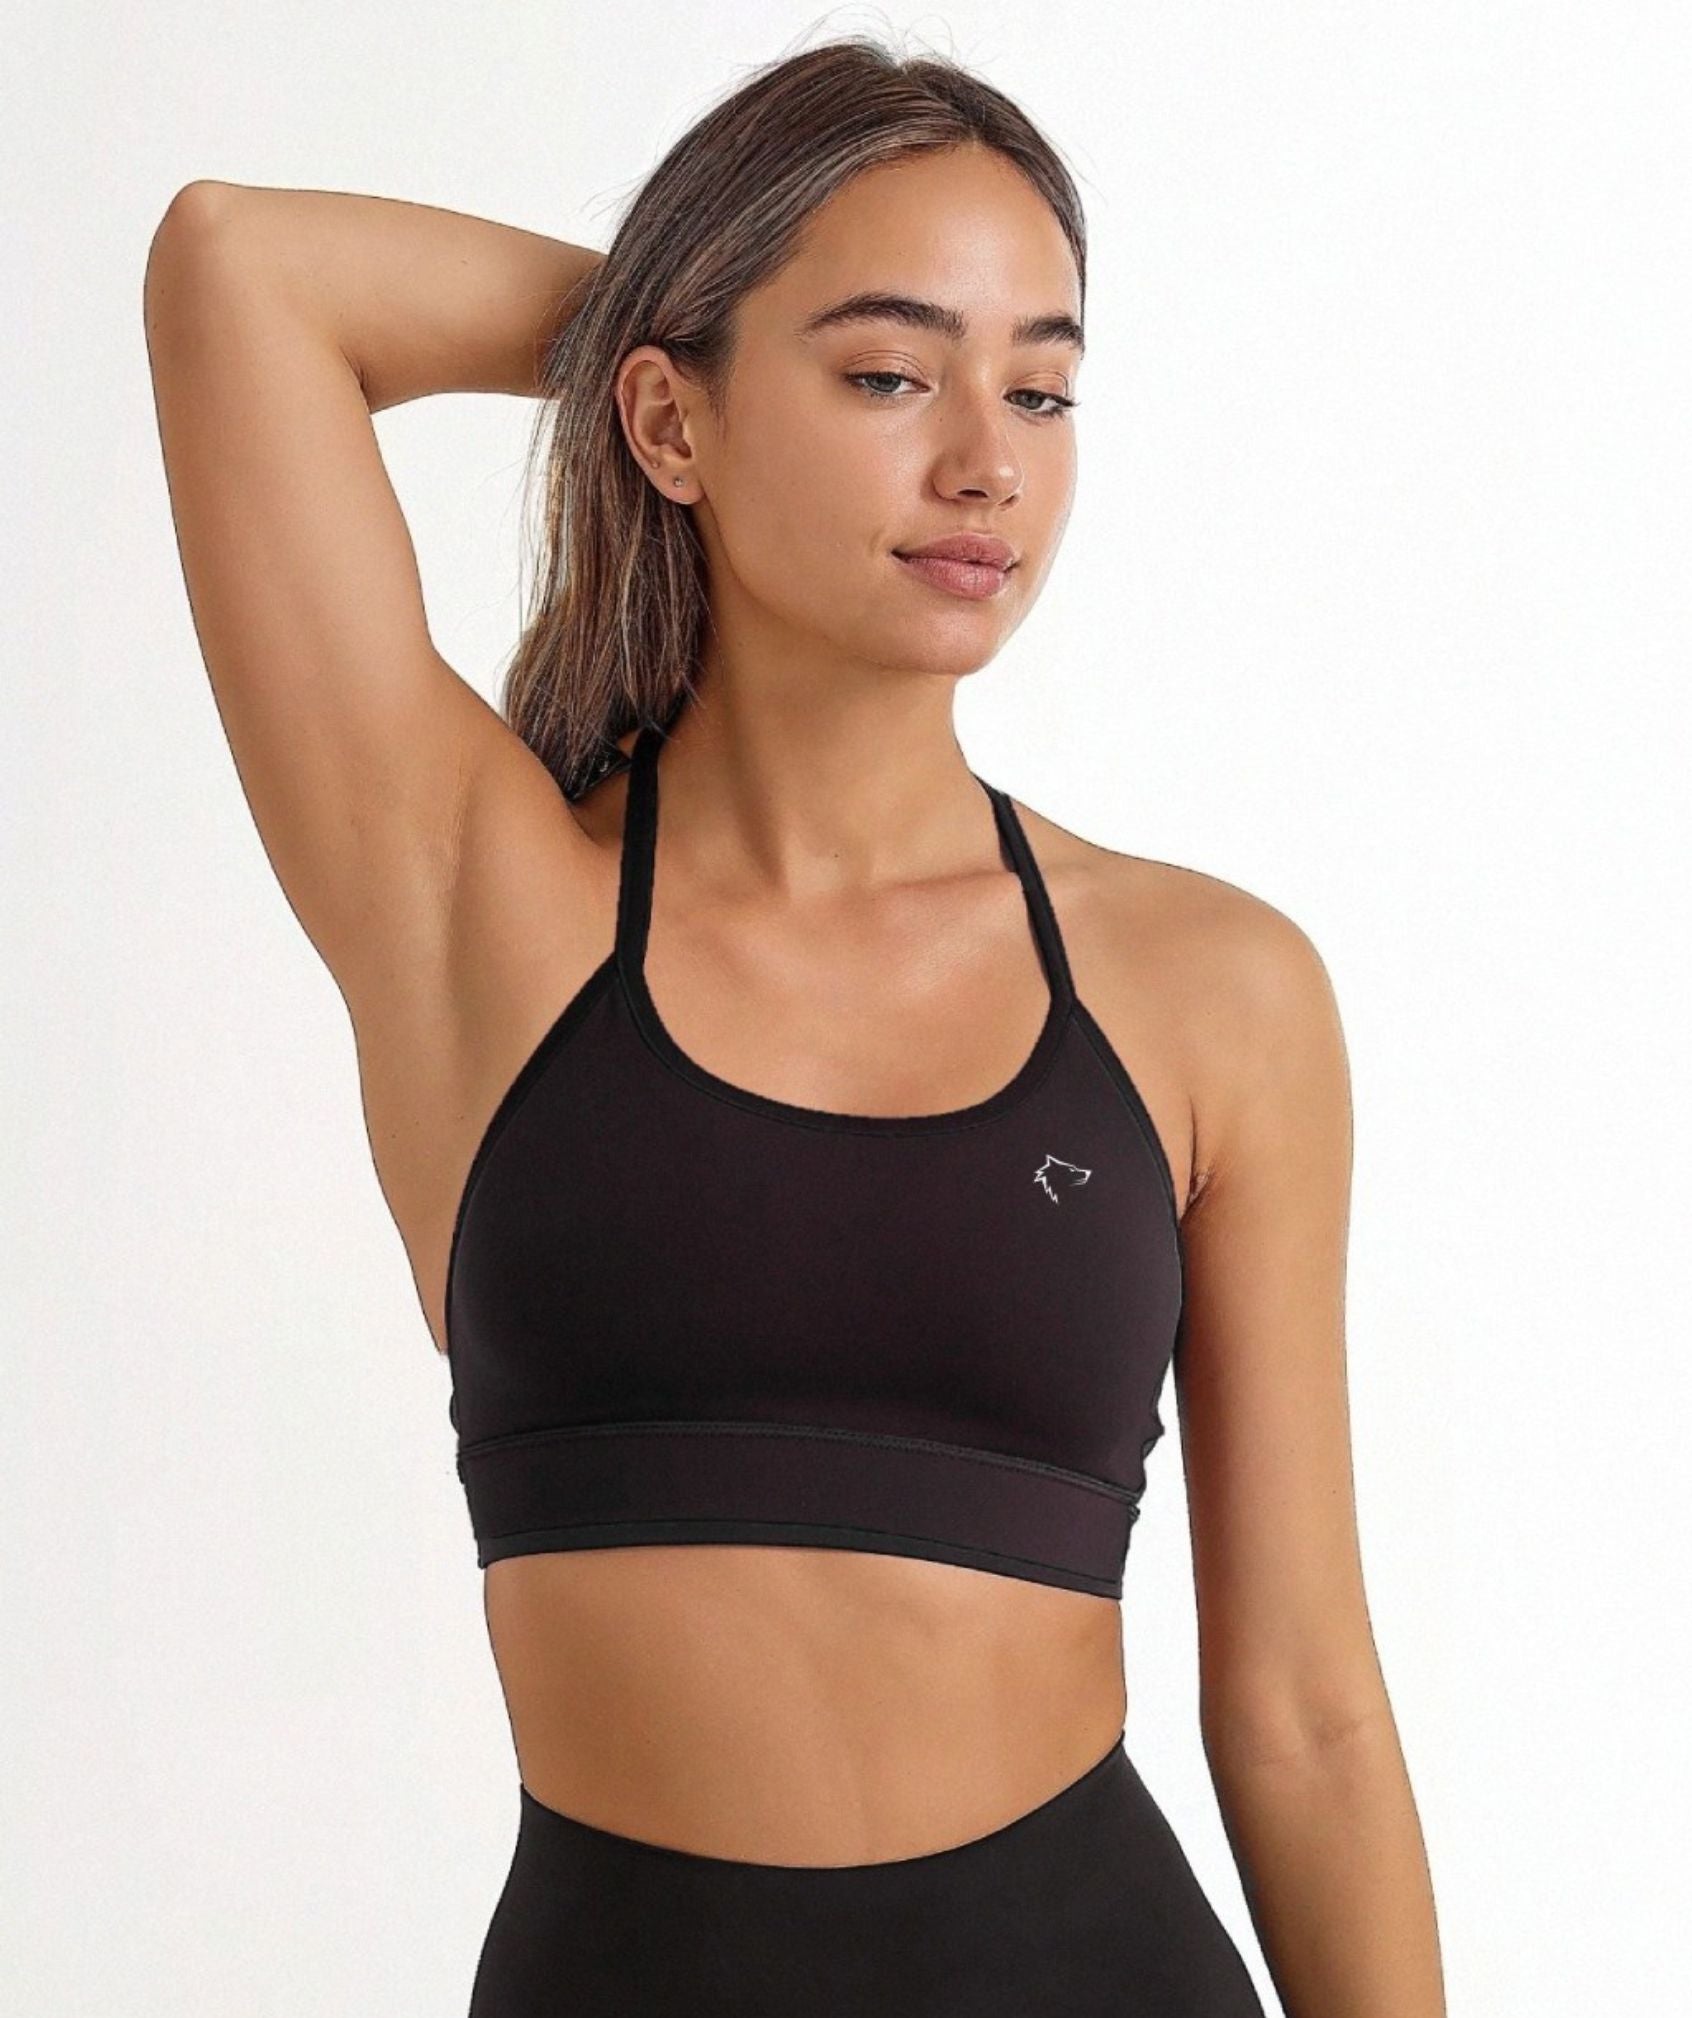 Apex™ black Serenity Bra front view - eco-friendly and supportive sports bra